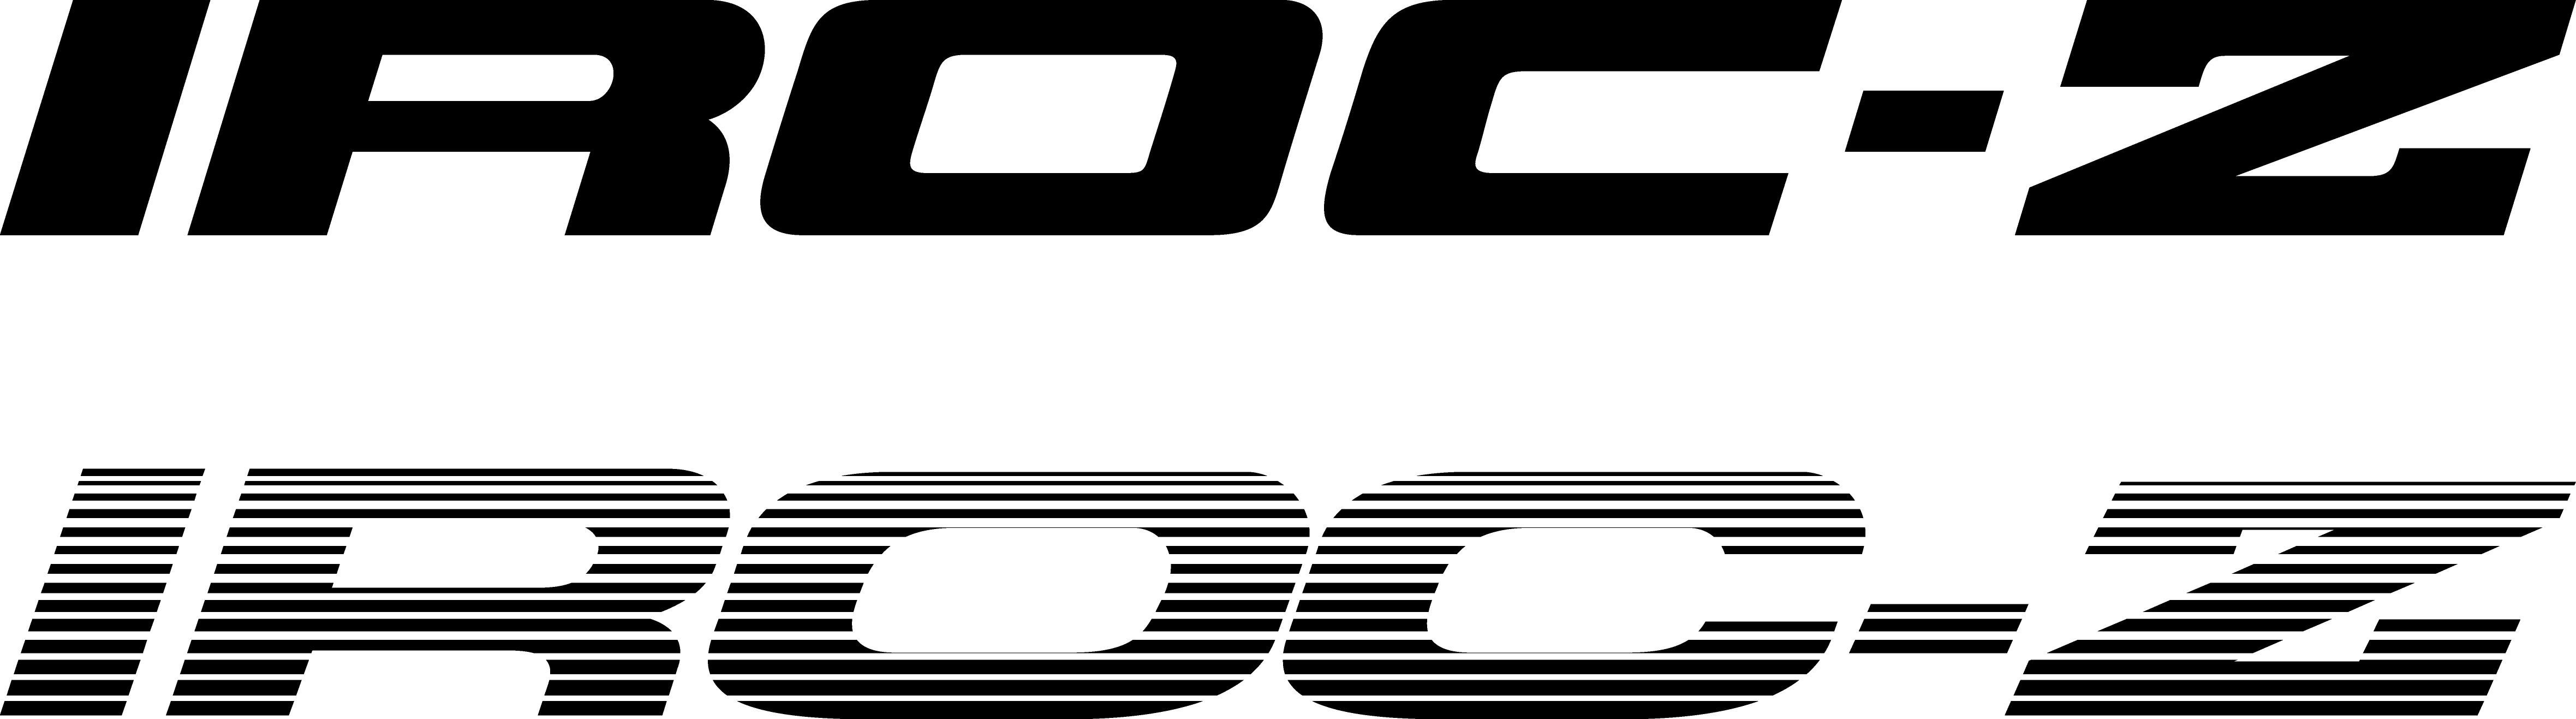 High Res Iroc-Z Logo? - Third Generation F-Body Message Boards